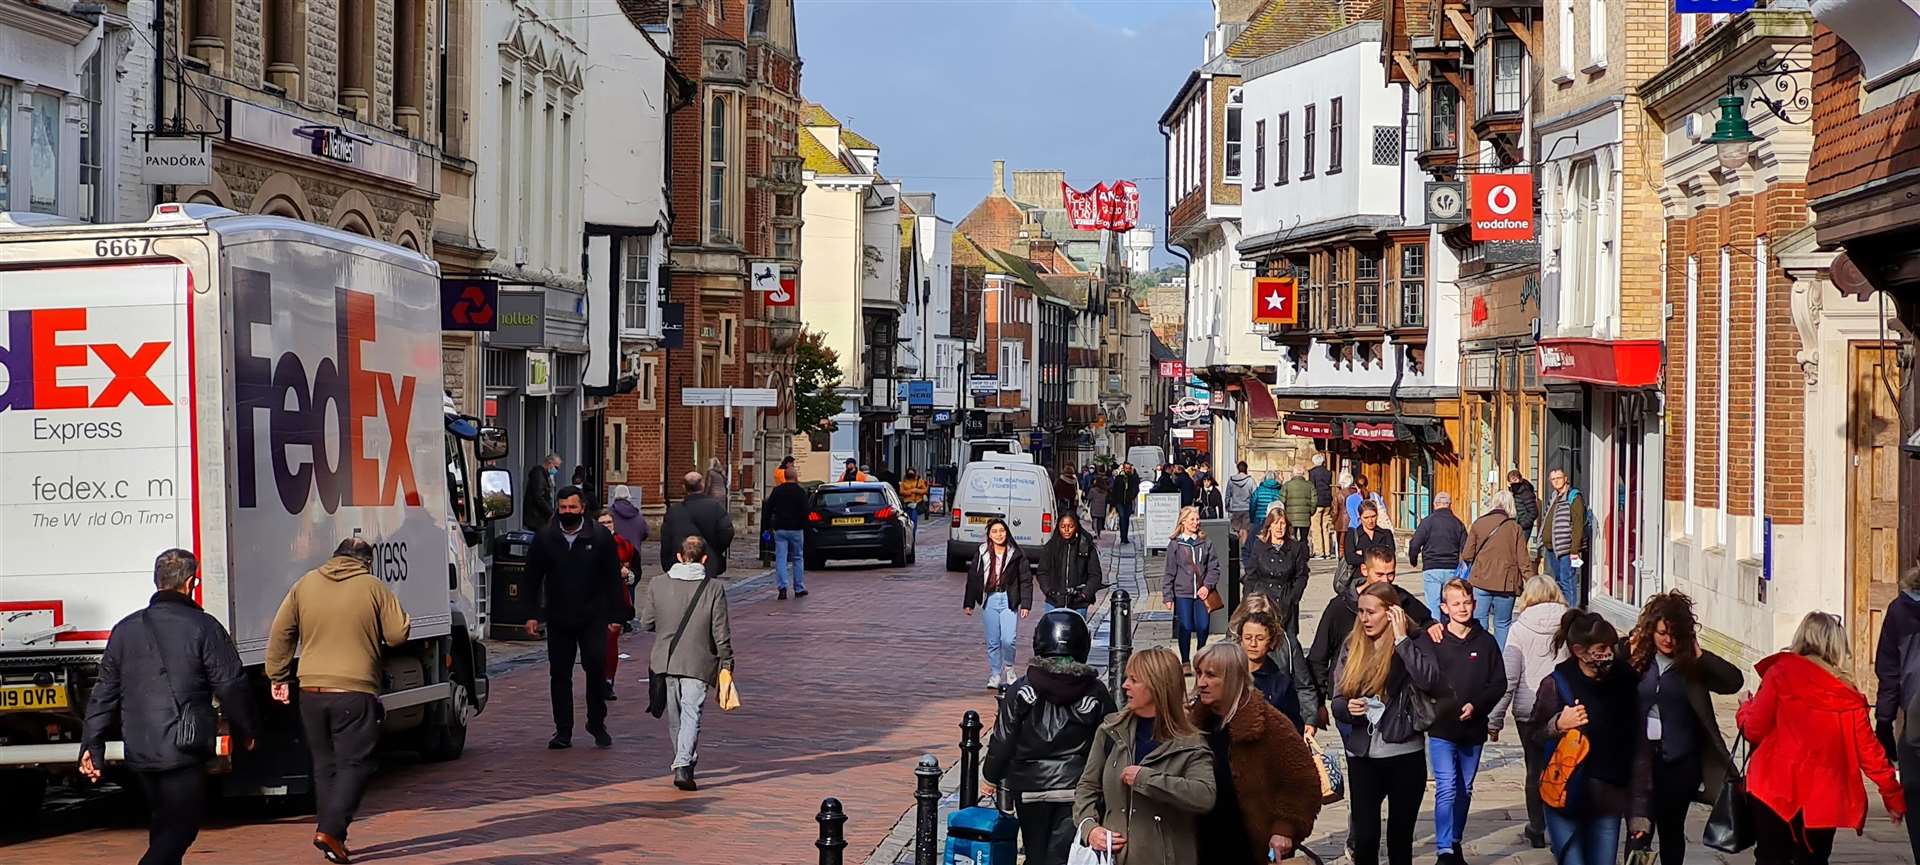 The population of Kent is getting more diverse with every passing decade